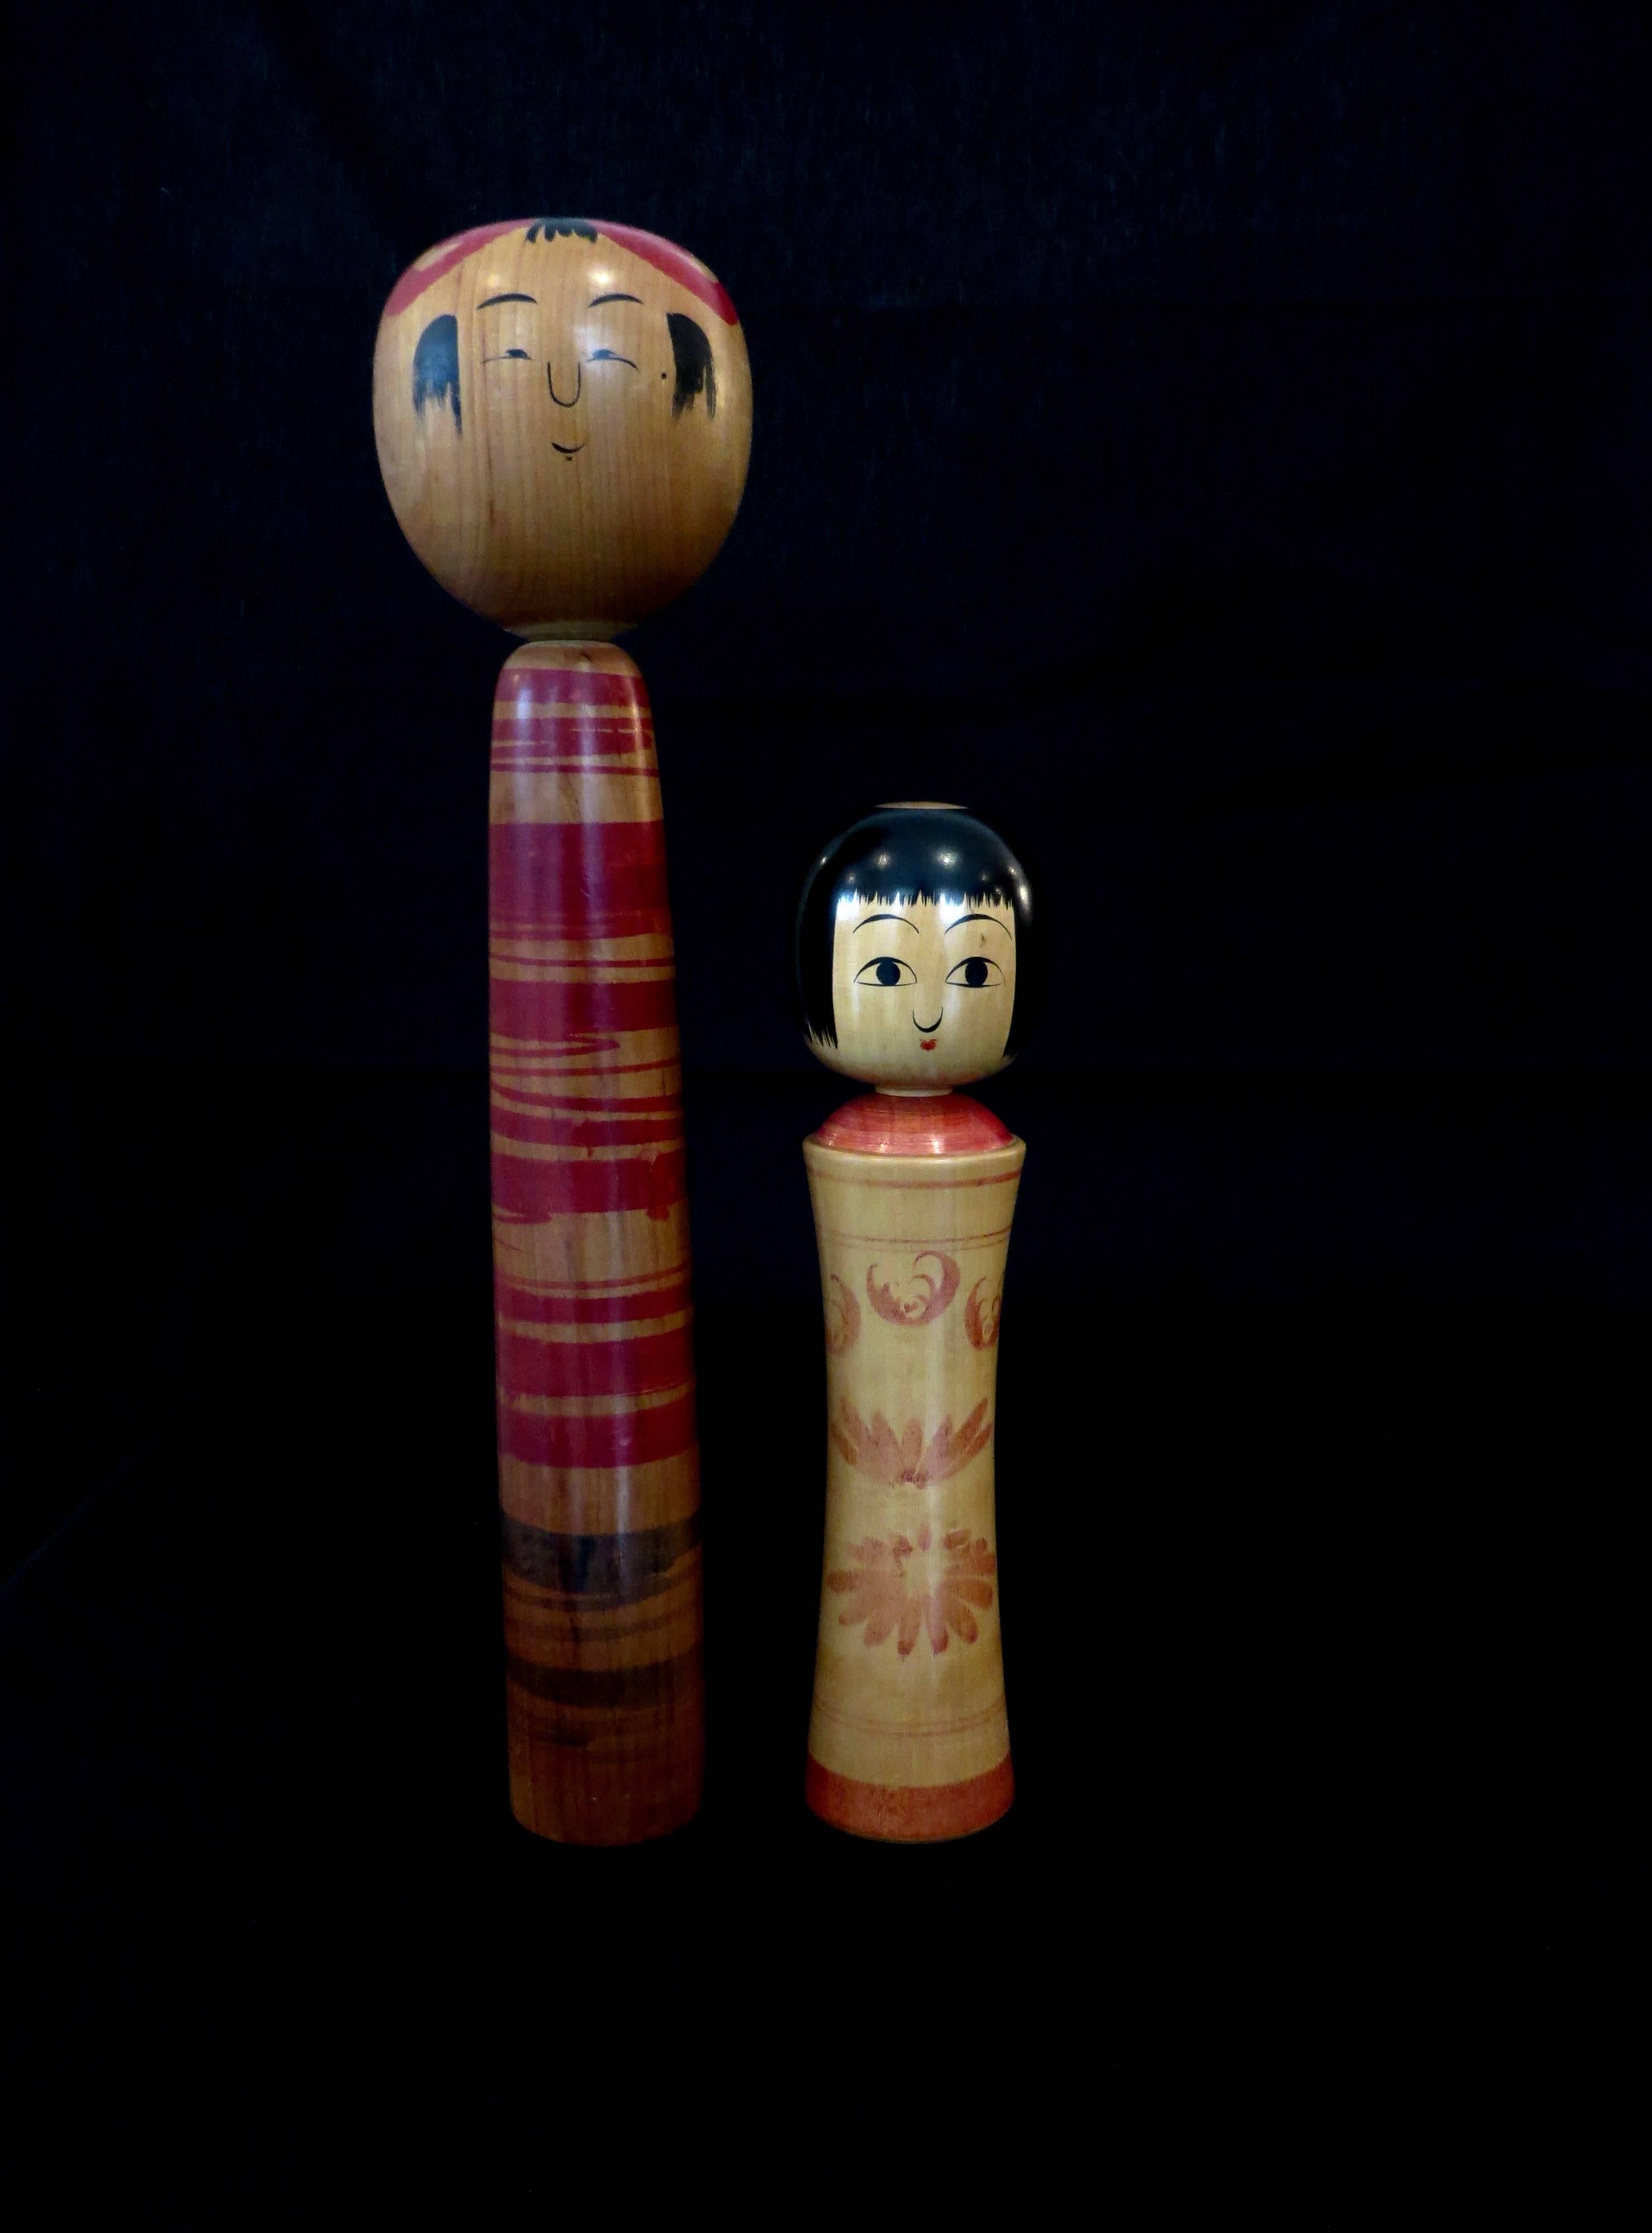 A collection of four Japanese Kokeshi Dolls. Vintage dolls from northern Tohoku region of Japan normally bought at hot spring or Onsen visits in the northeast of Japan. Hand-carved, hand-painted, all signed.
Measure: The tallest doll is 18